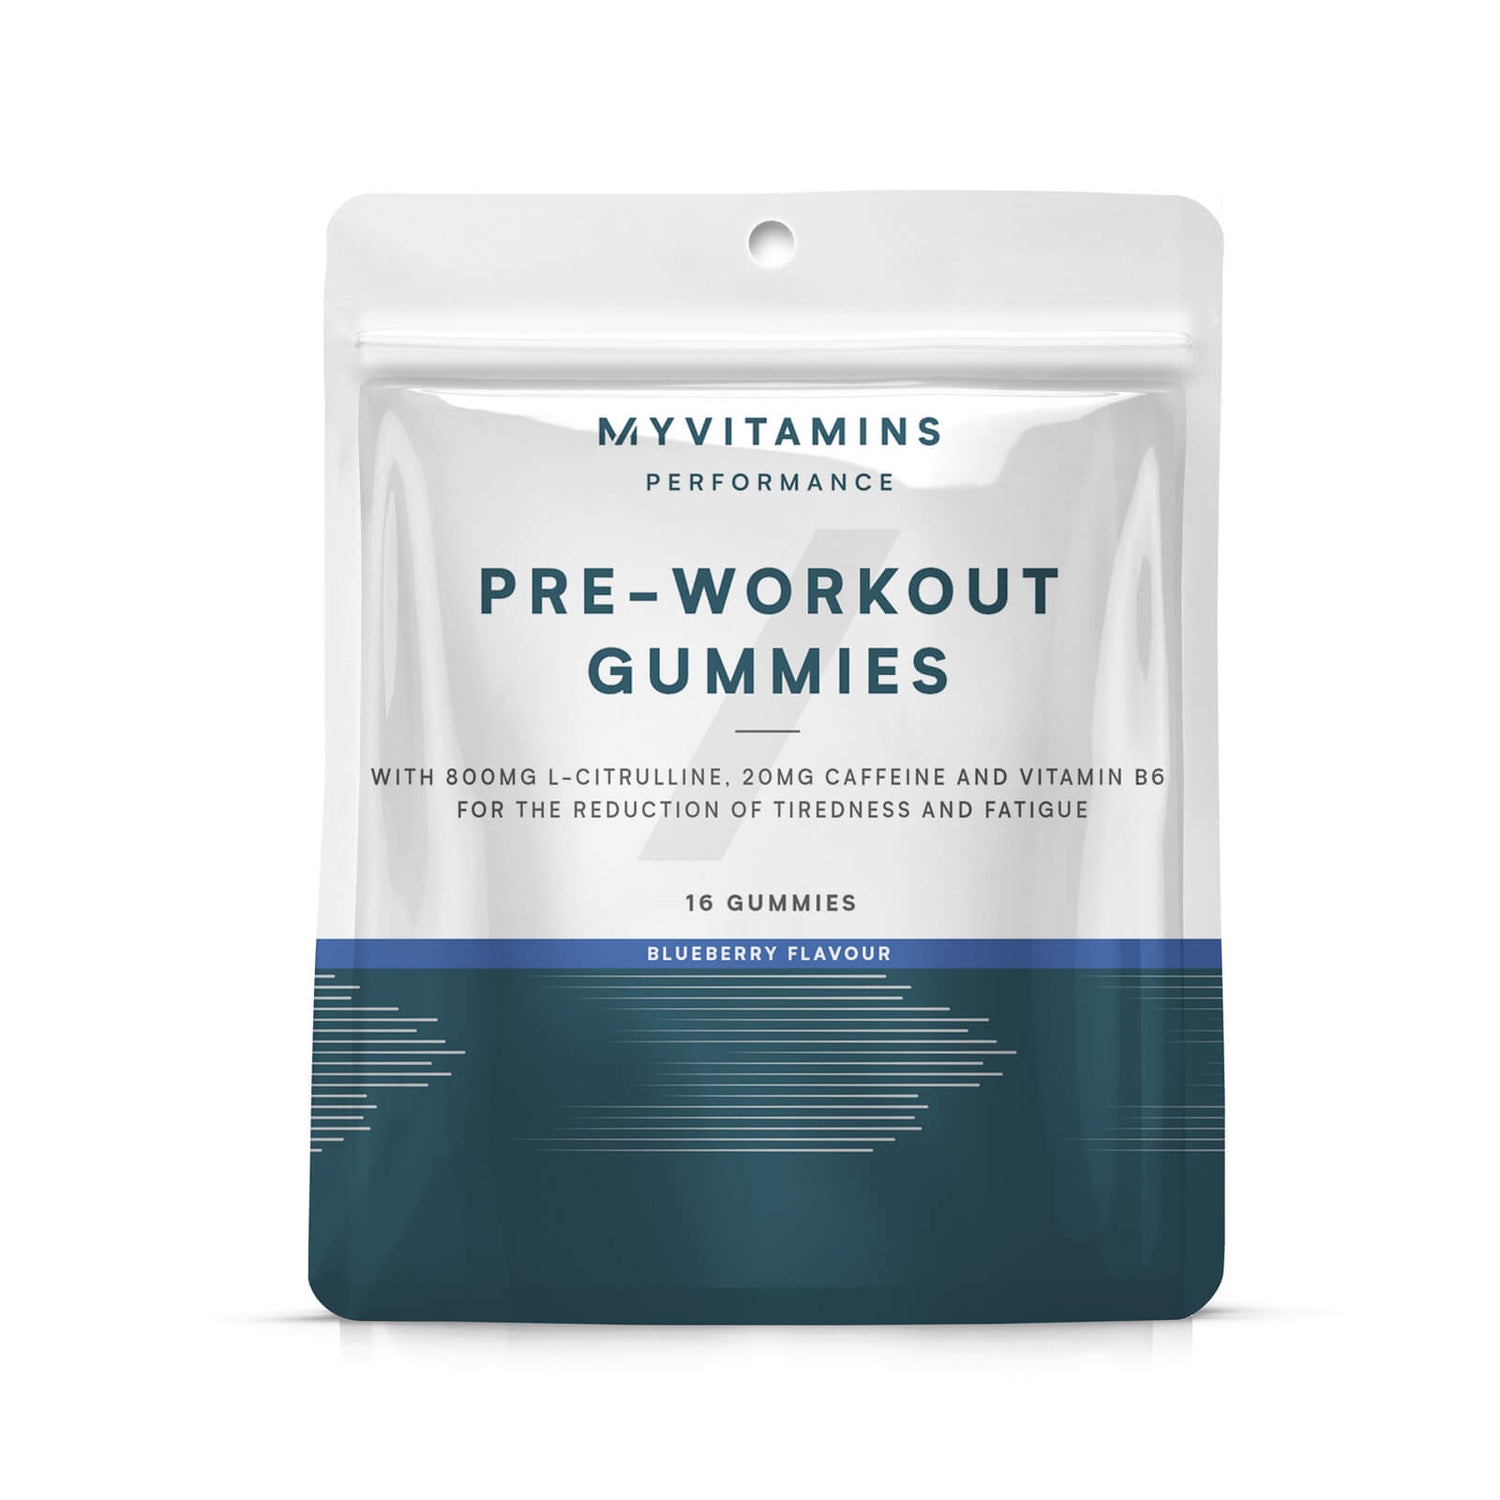 Pre-Workout Gummies - Sample Pouch - Blueberry